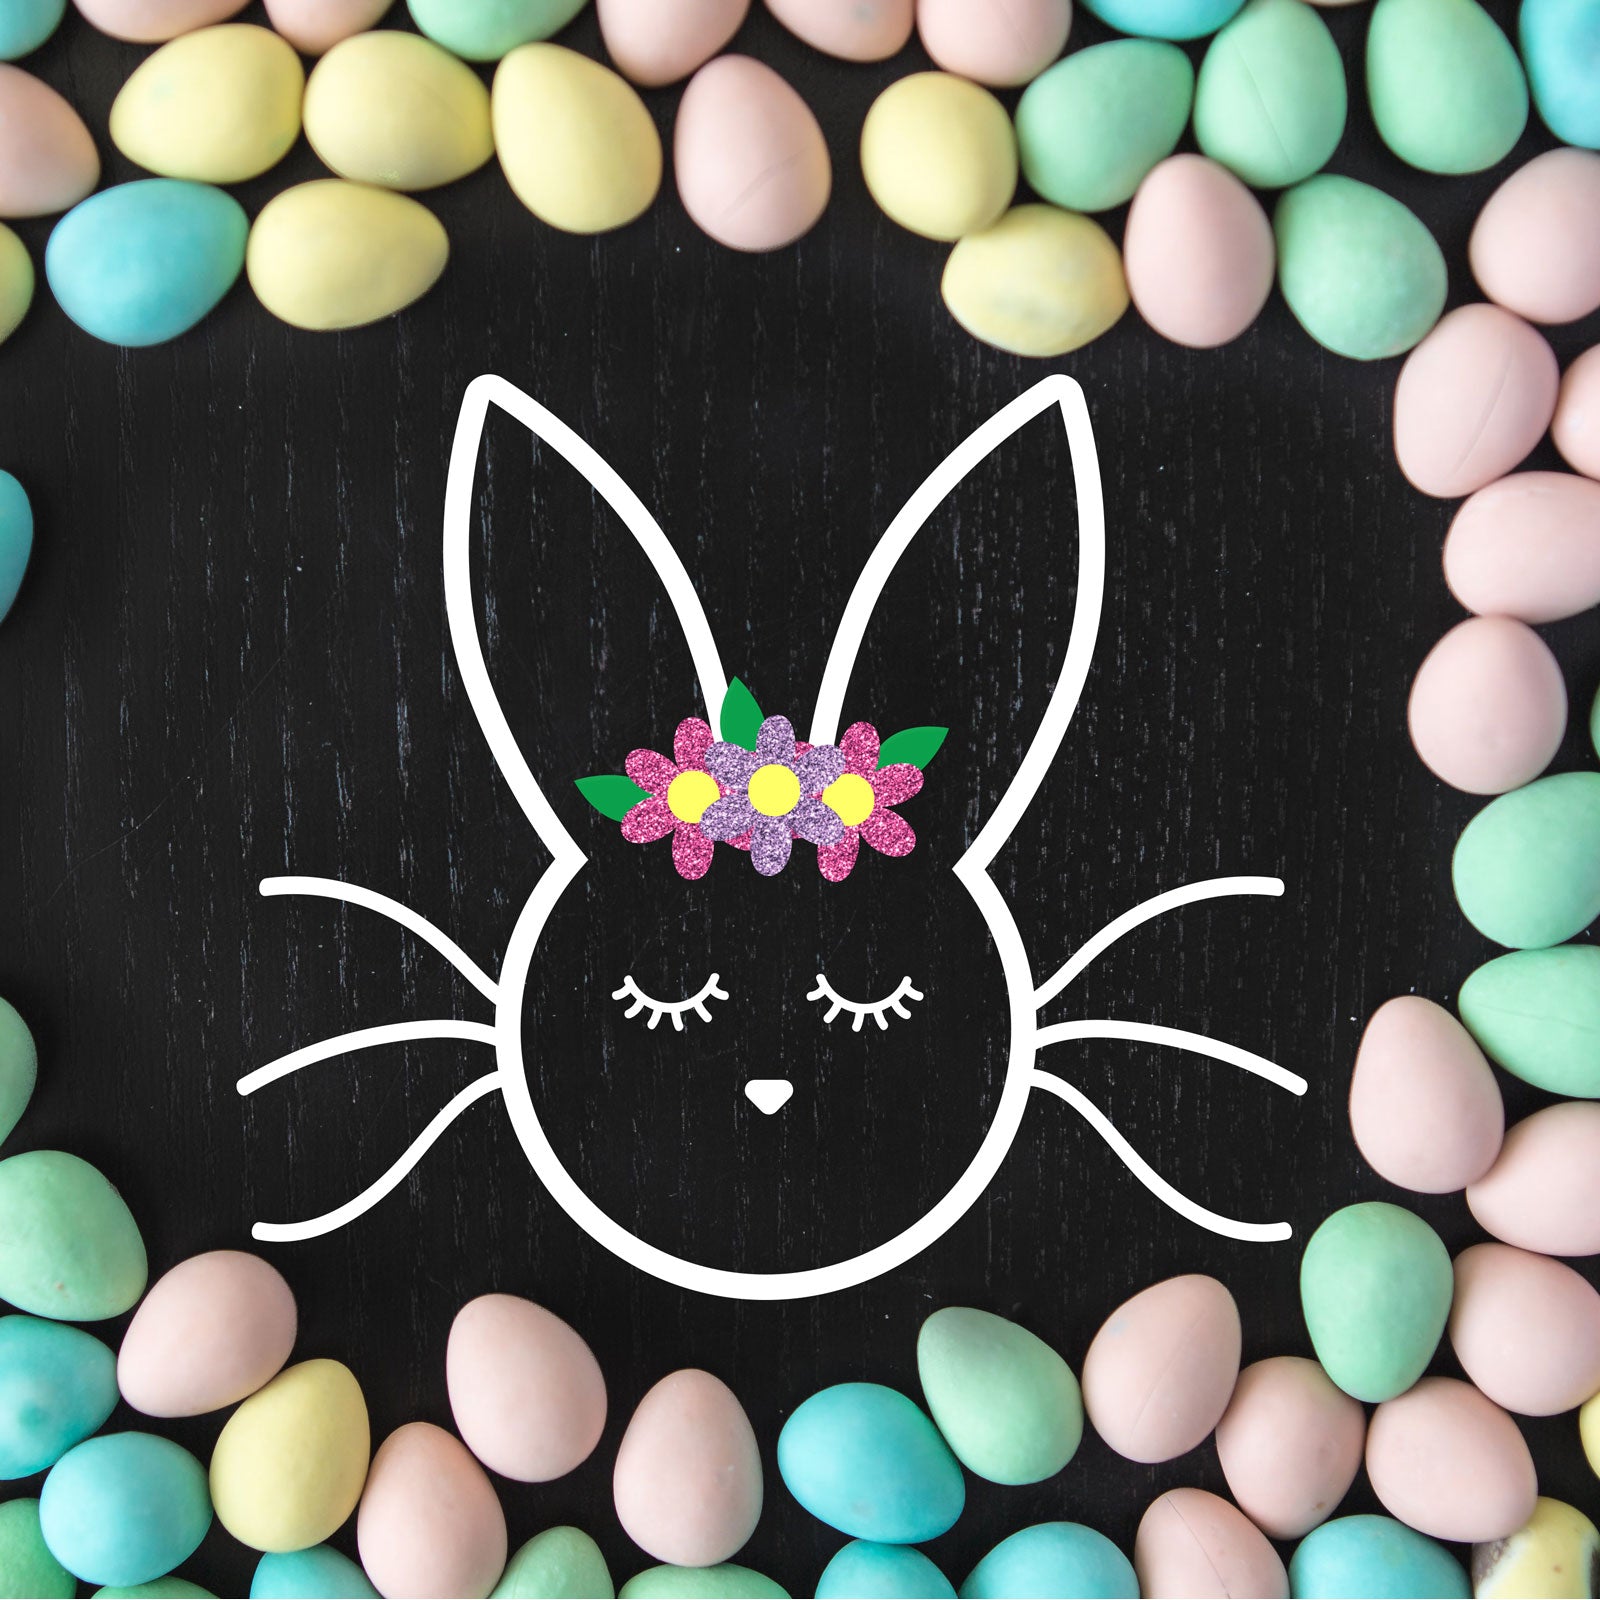 Freebie Friday - Sleepy Bunny Face svg with optional flowers that can be used separately - Free for Personal Use